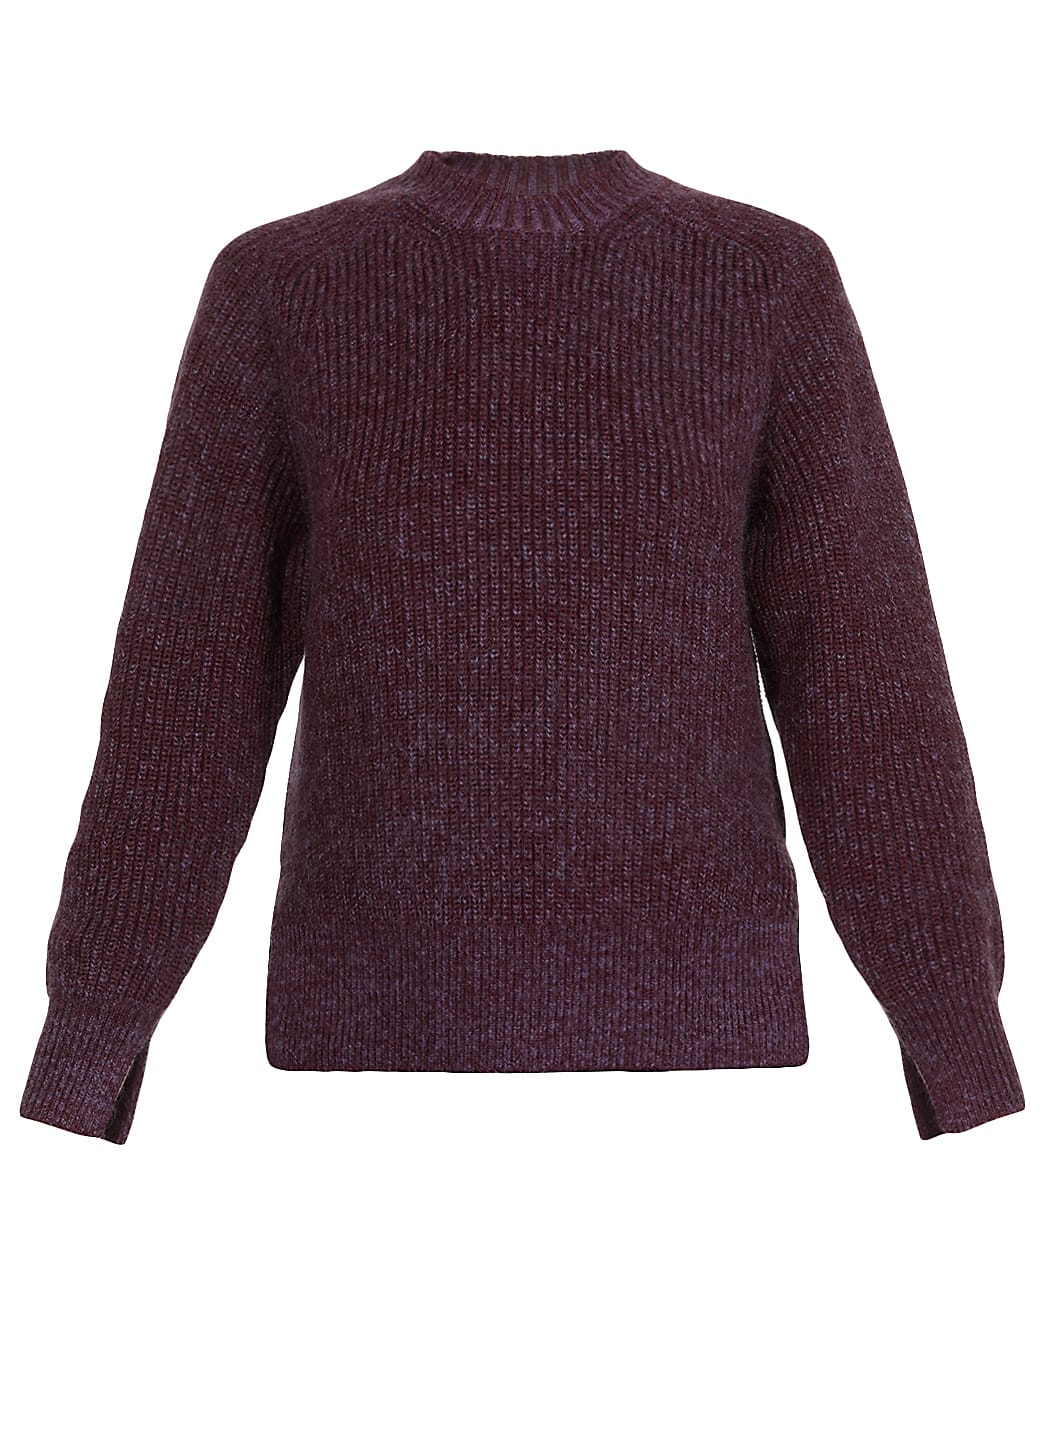 3.1 Phillip Lim Mohair And Wool Sweater In Aubergine | ModeSens